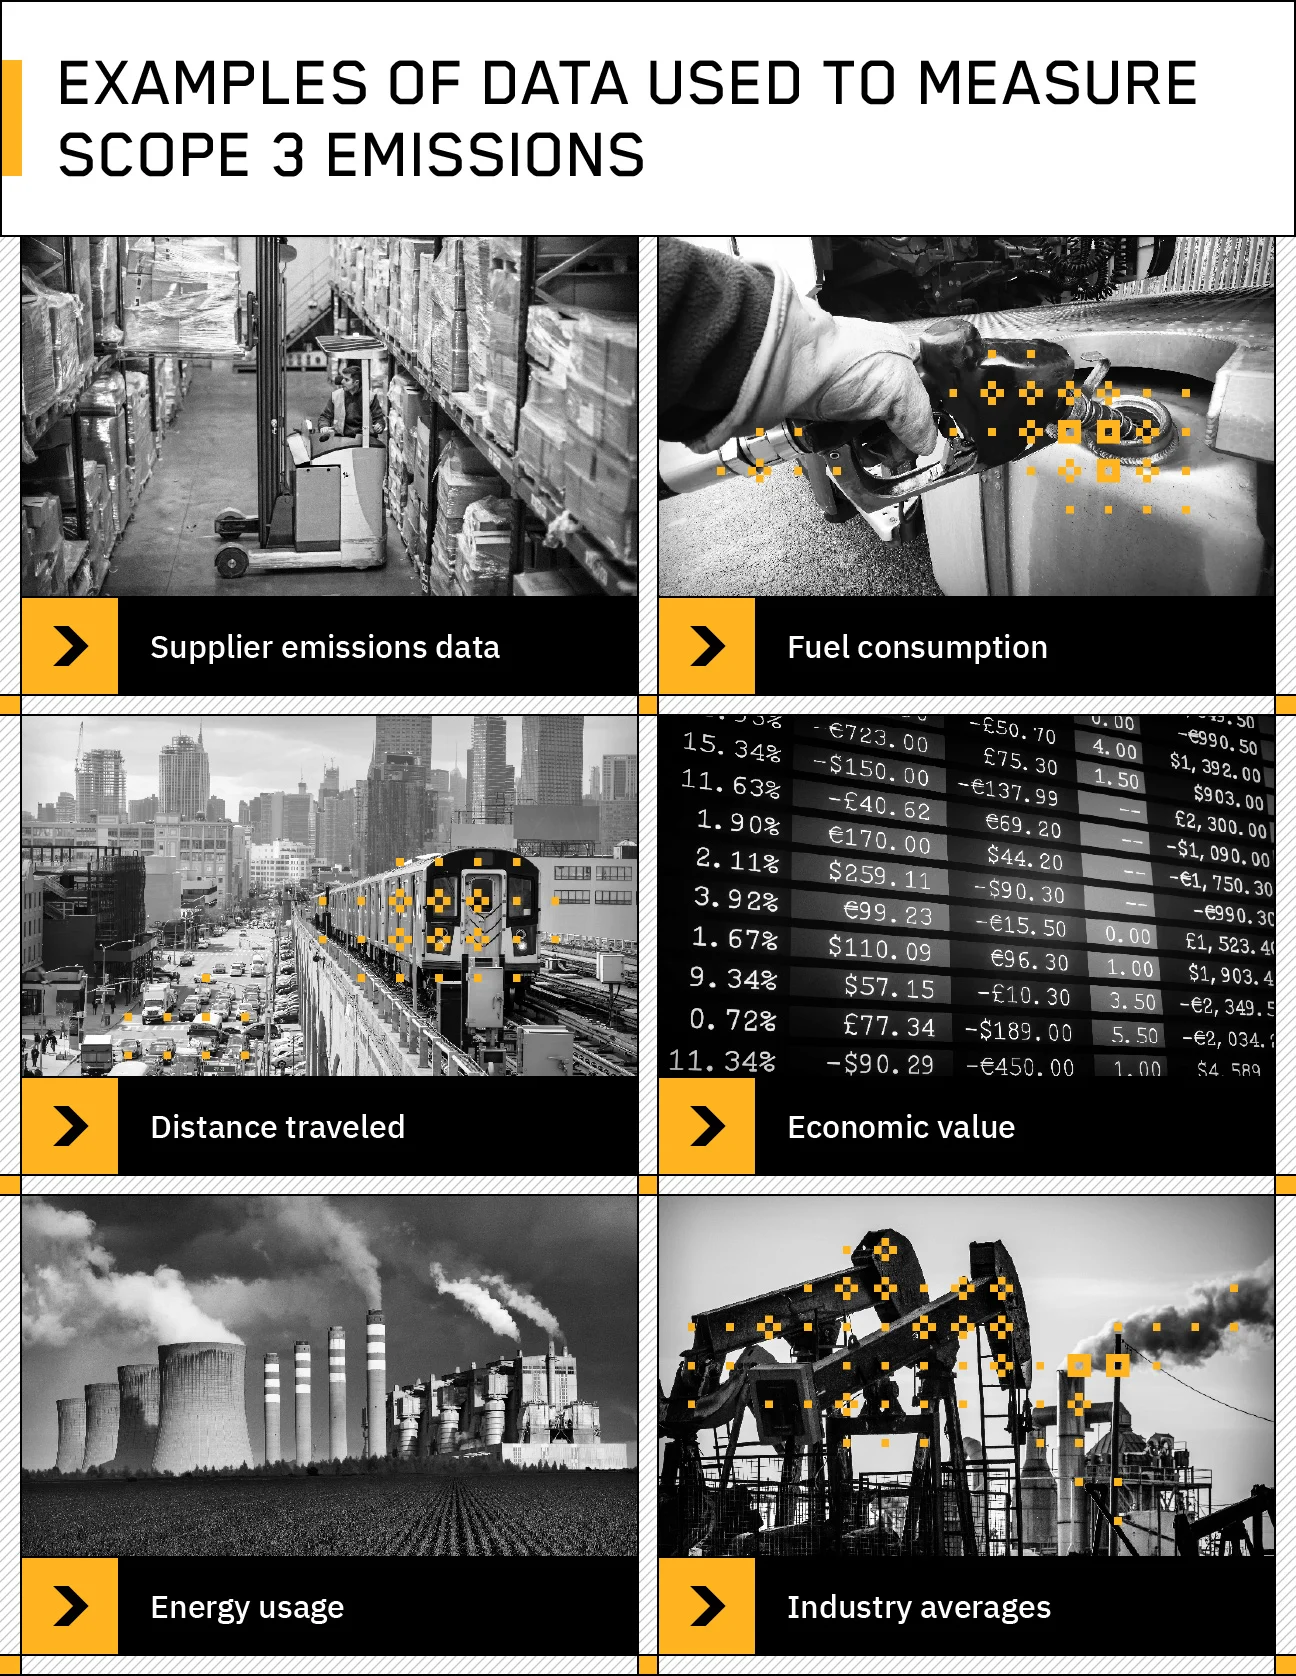 collage of black and white photos representing examples of data used to measure scope 3 emissions, some photos have yellow decorative glyphs highlighting smoke stacks and trucks